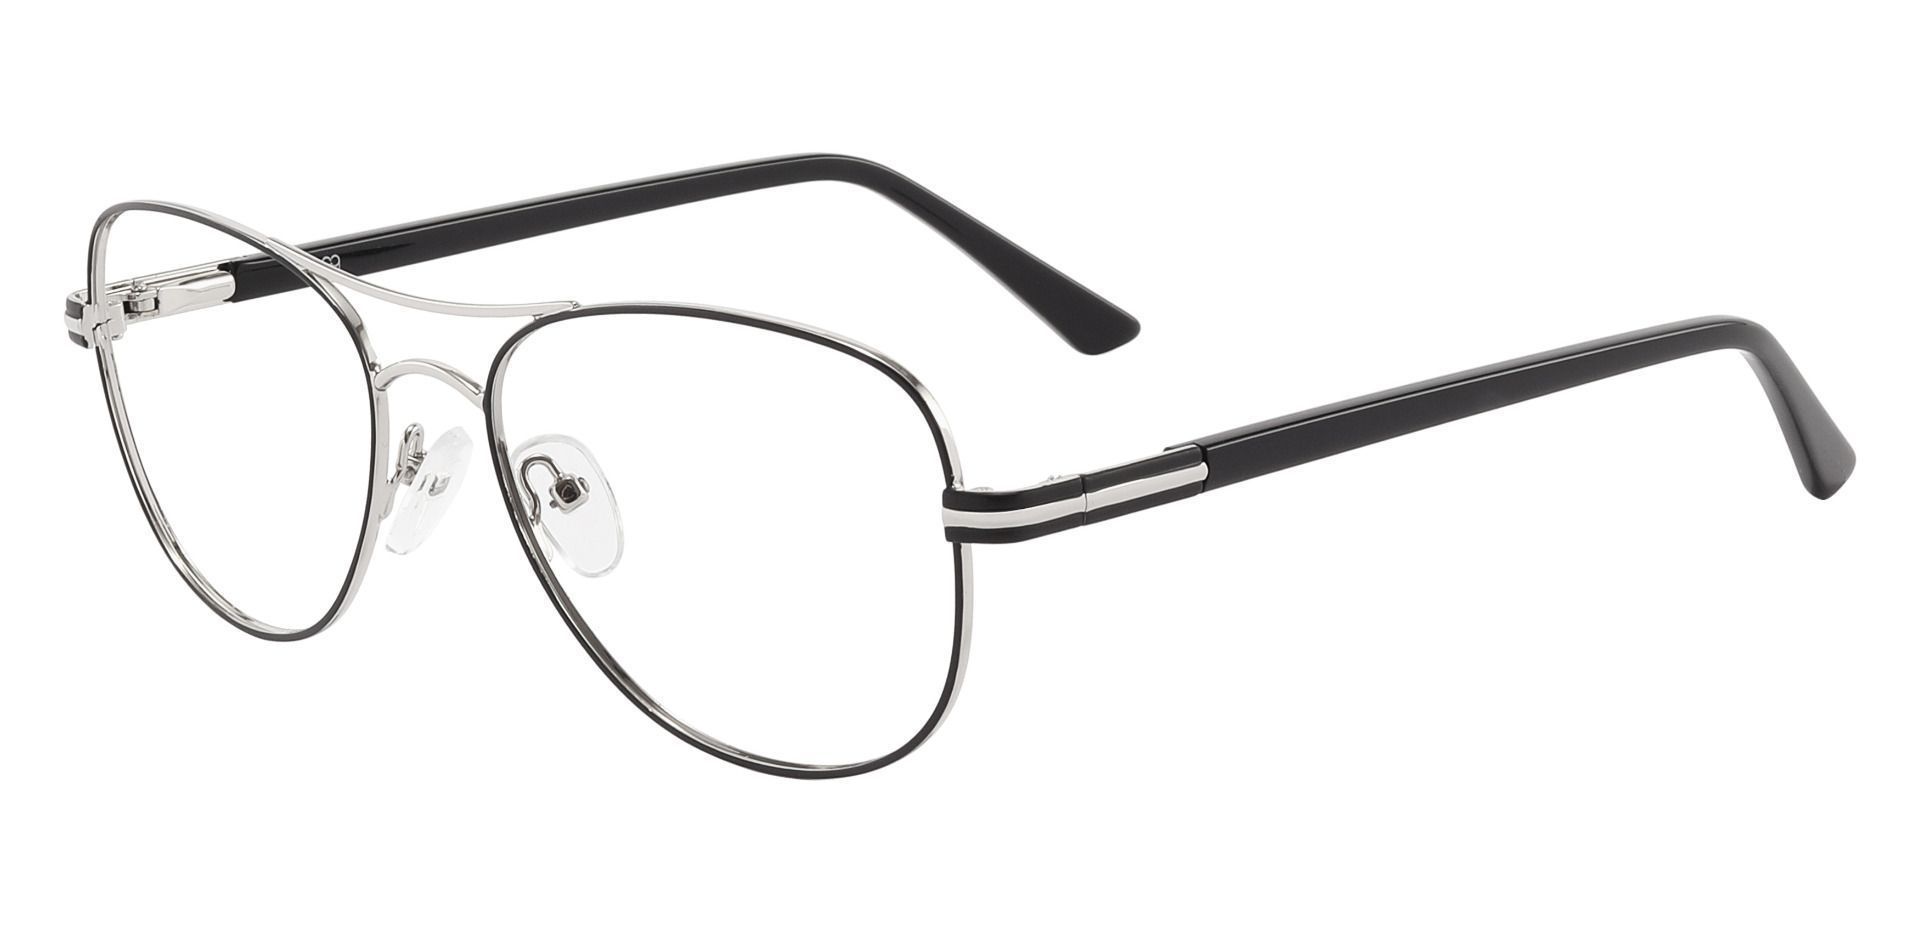 Reeves Aviator Non-Rx Glasses - Silver